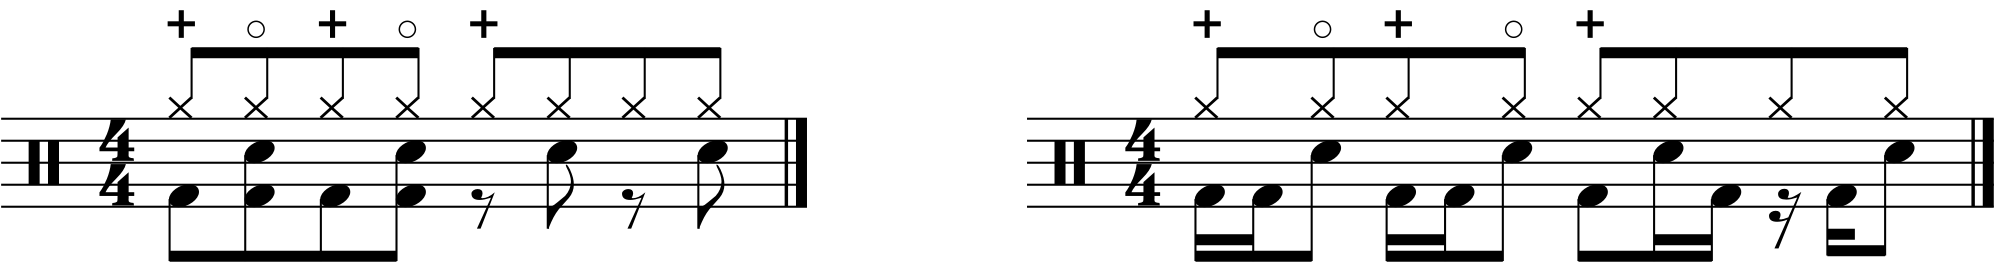 Opening hi hats in a double time groove.